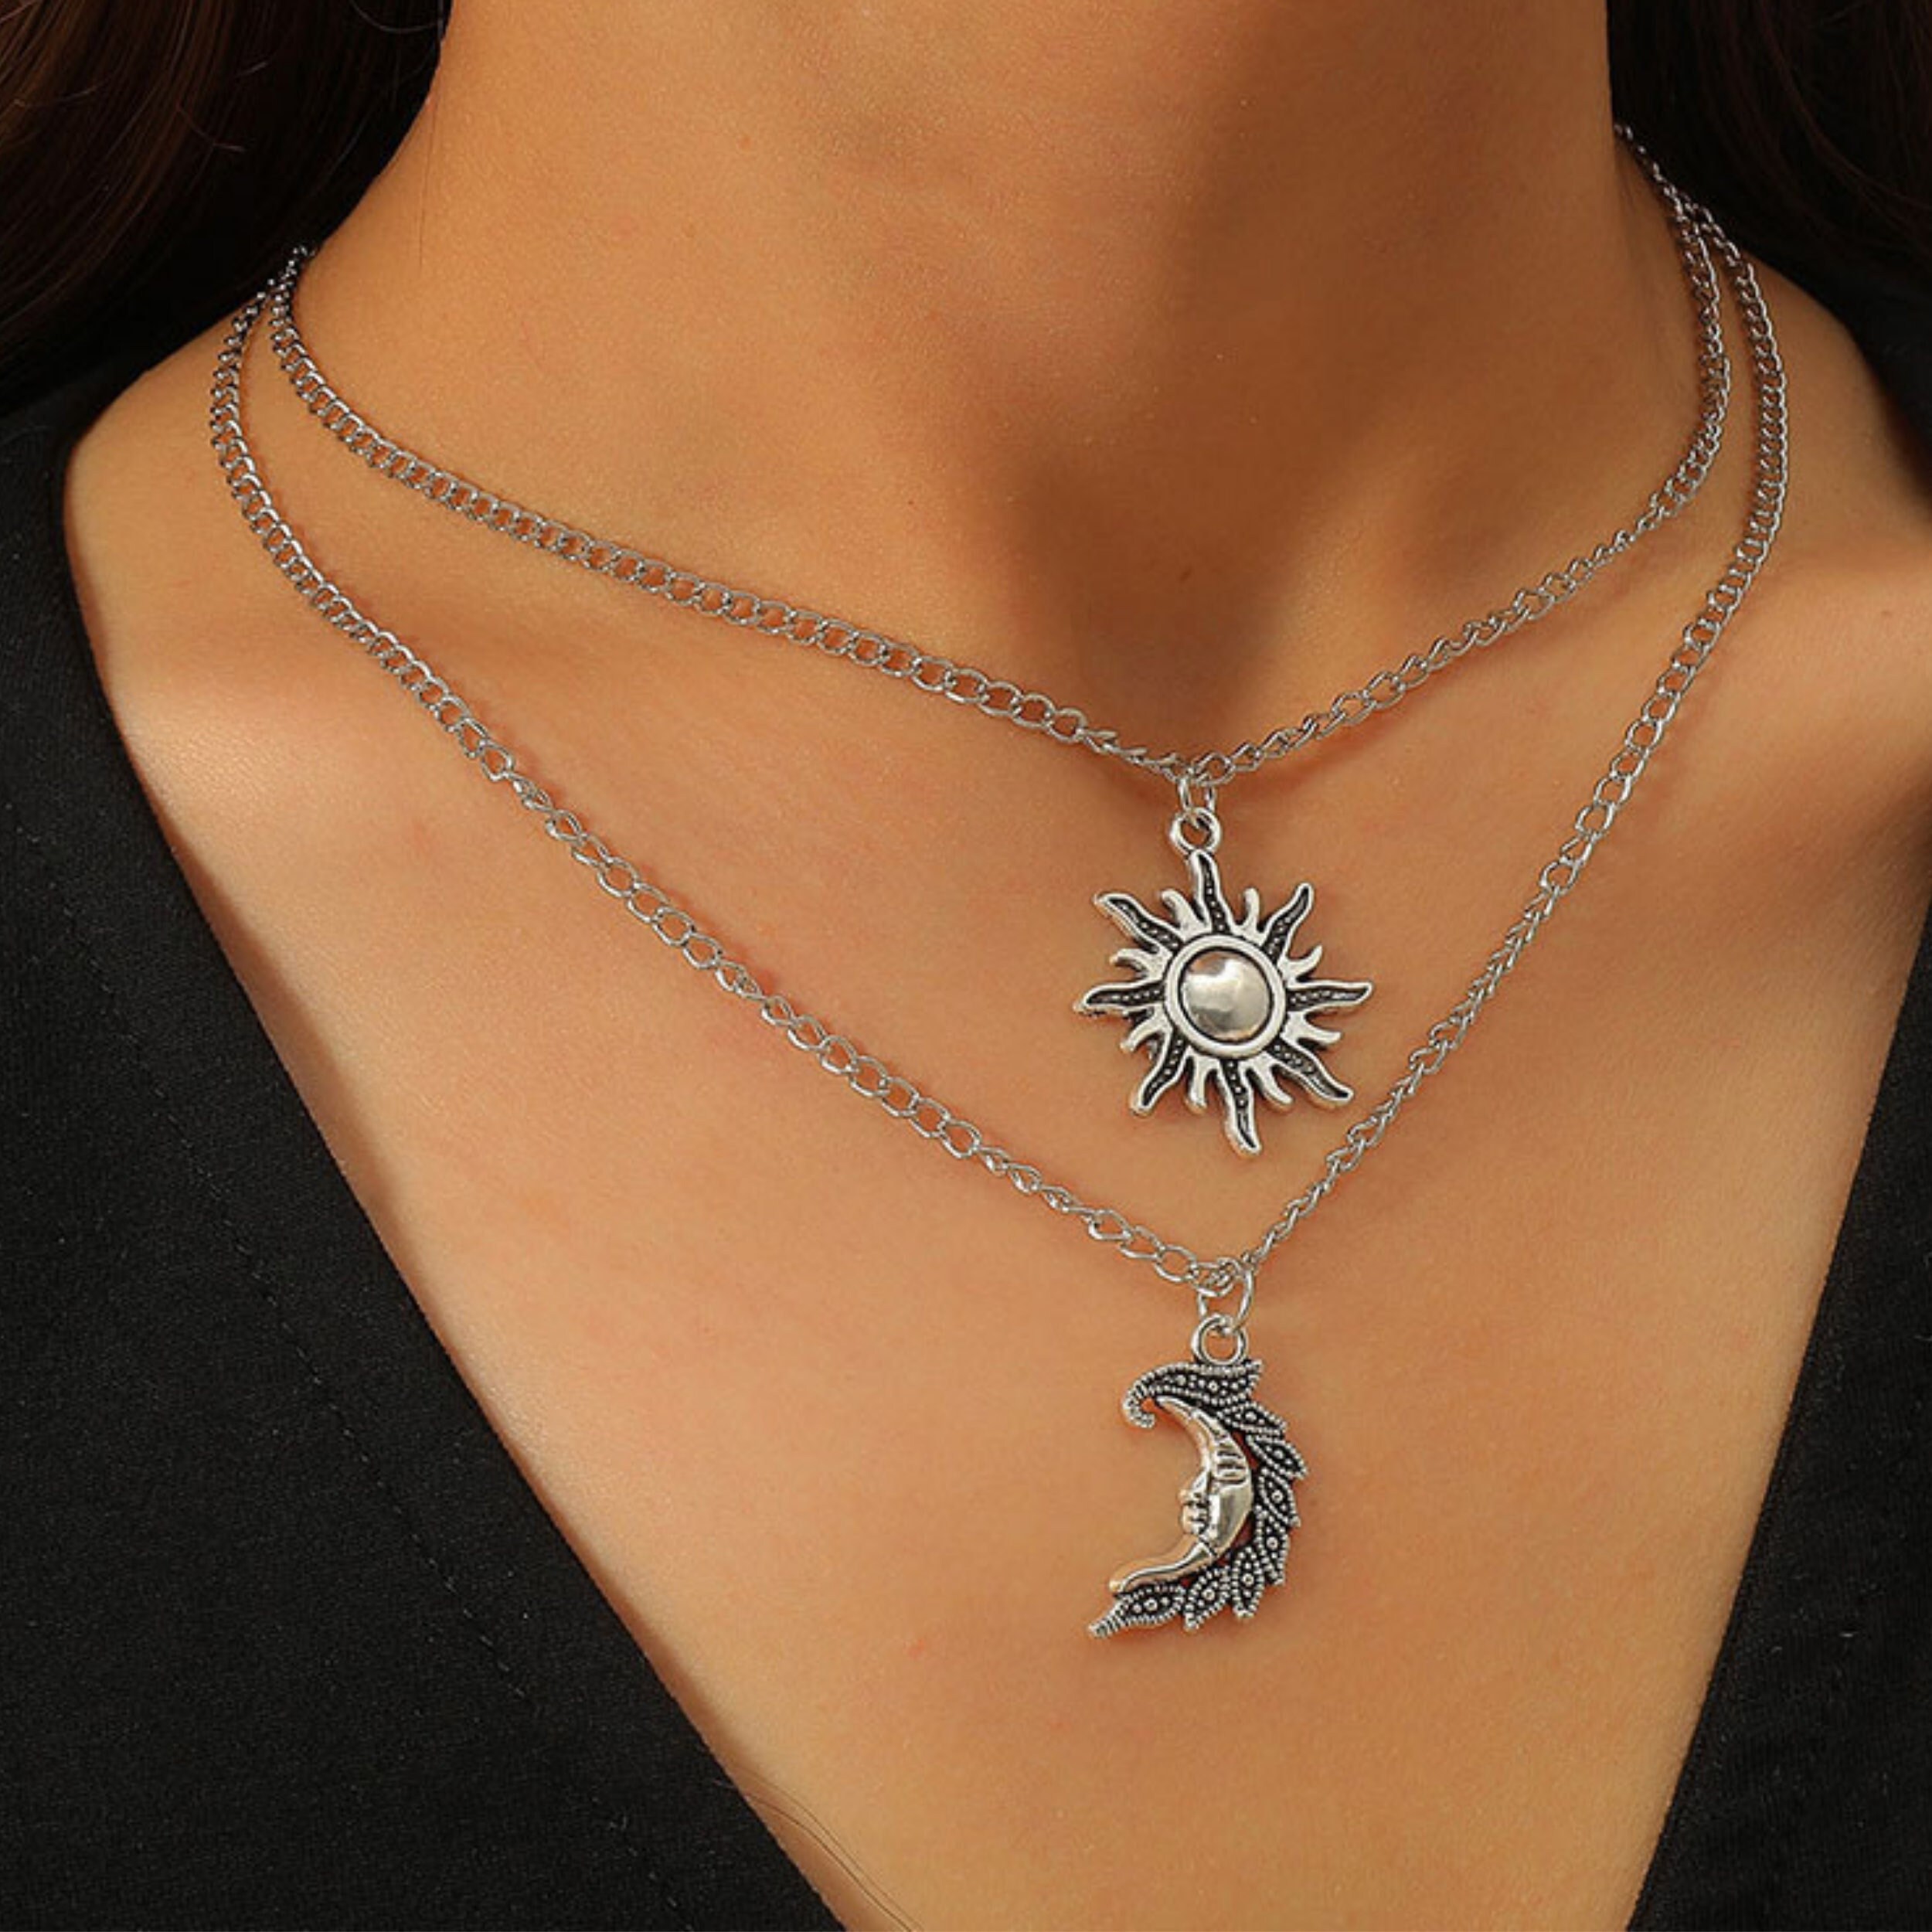 Vintage Multilayer Moon Sun Pendant Necklace Sweater Silver Gold Chain Jewellery